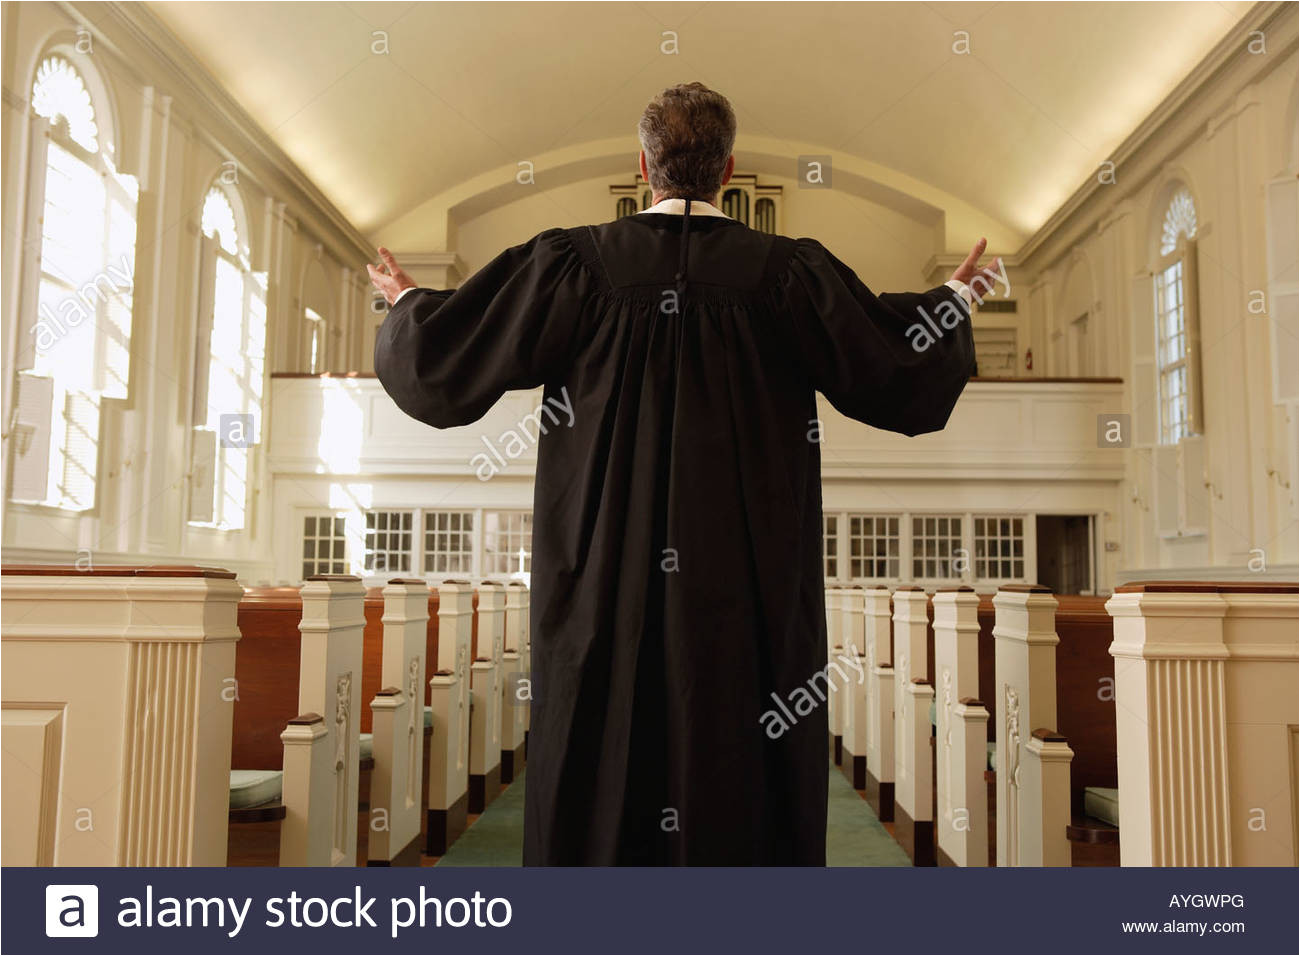 priest with arms raised in church stock image